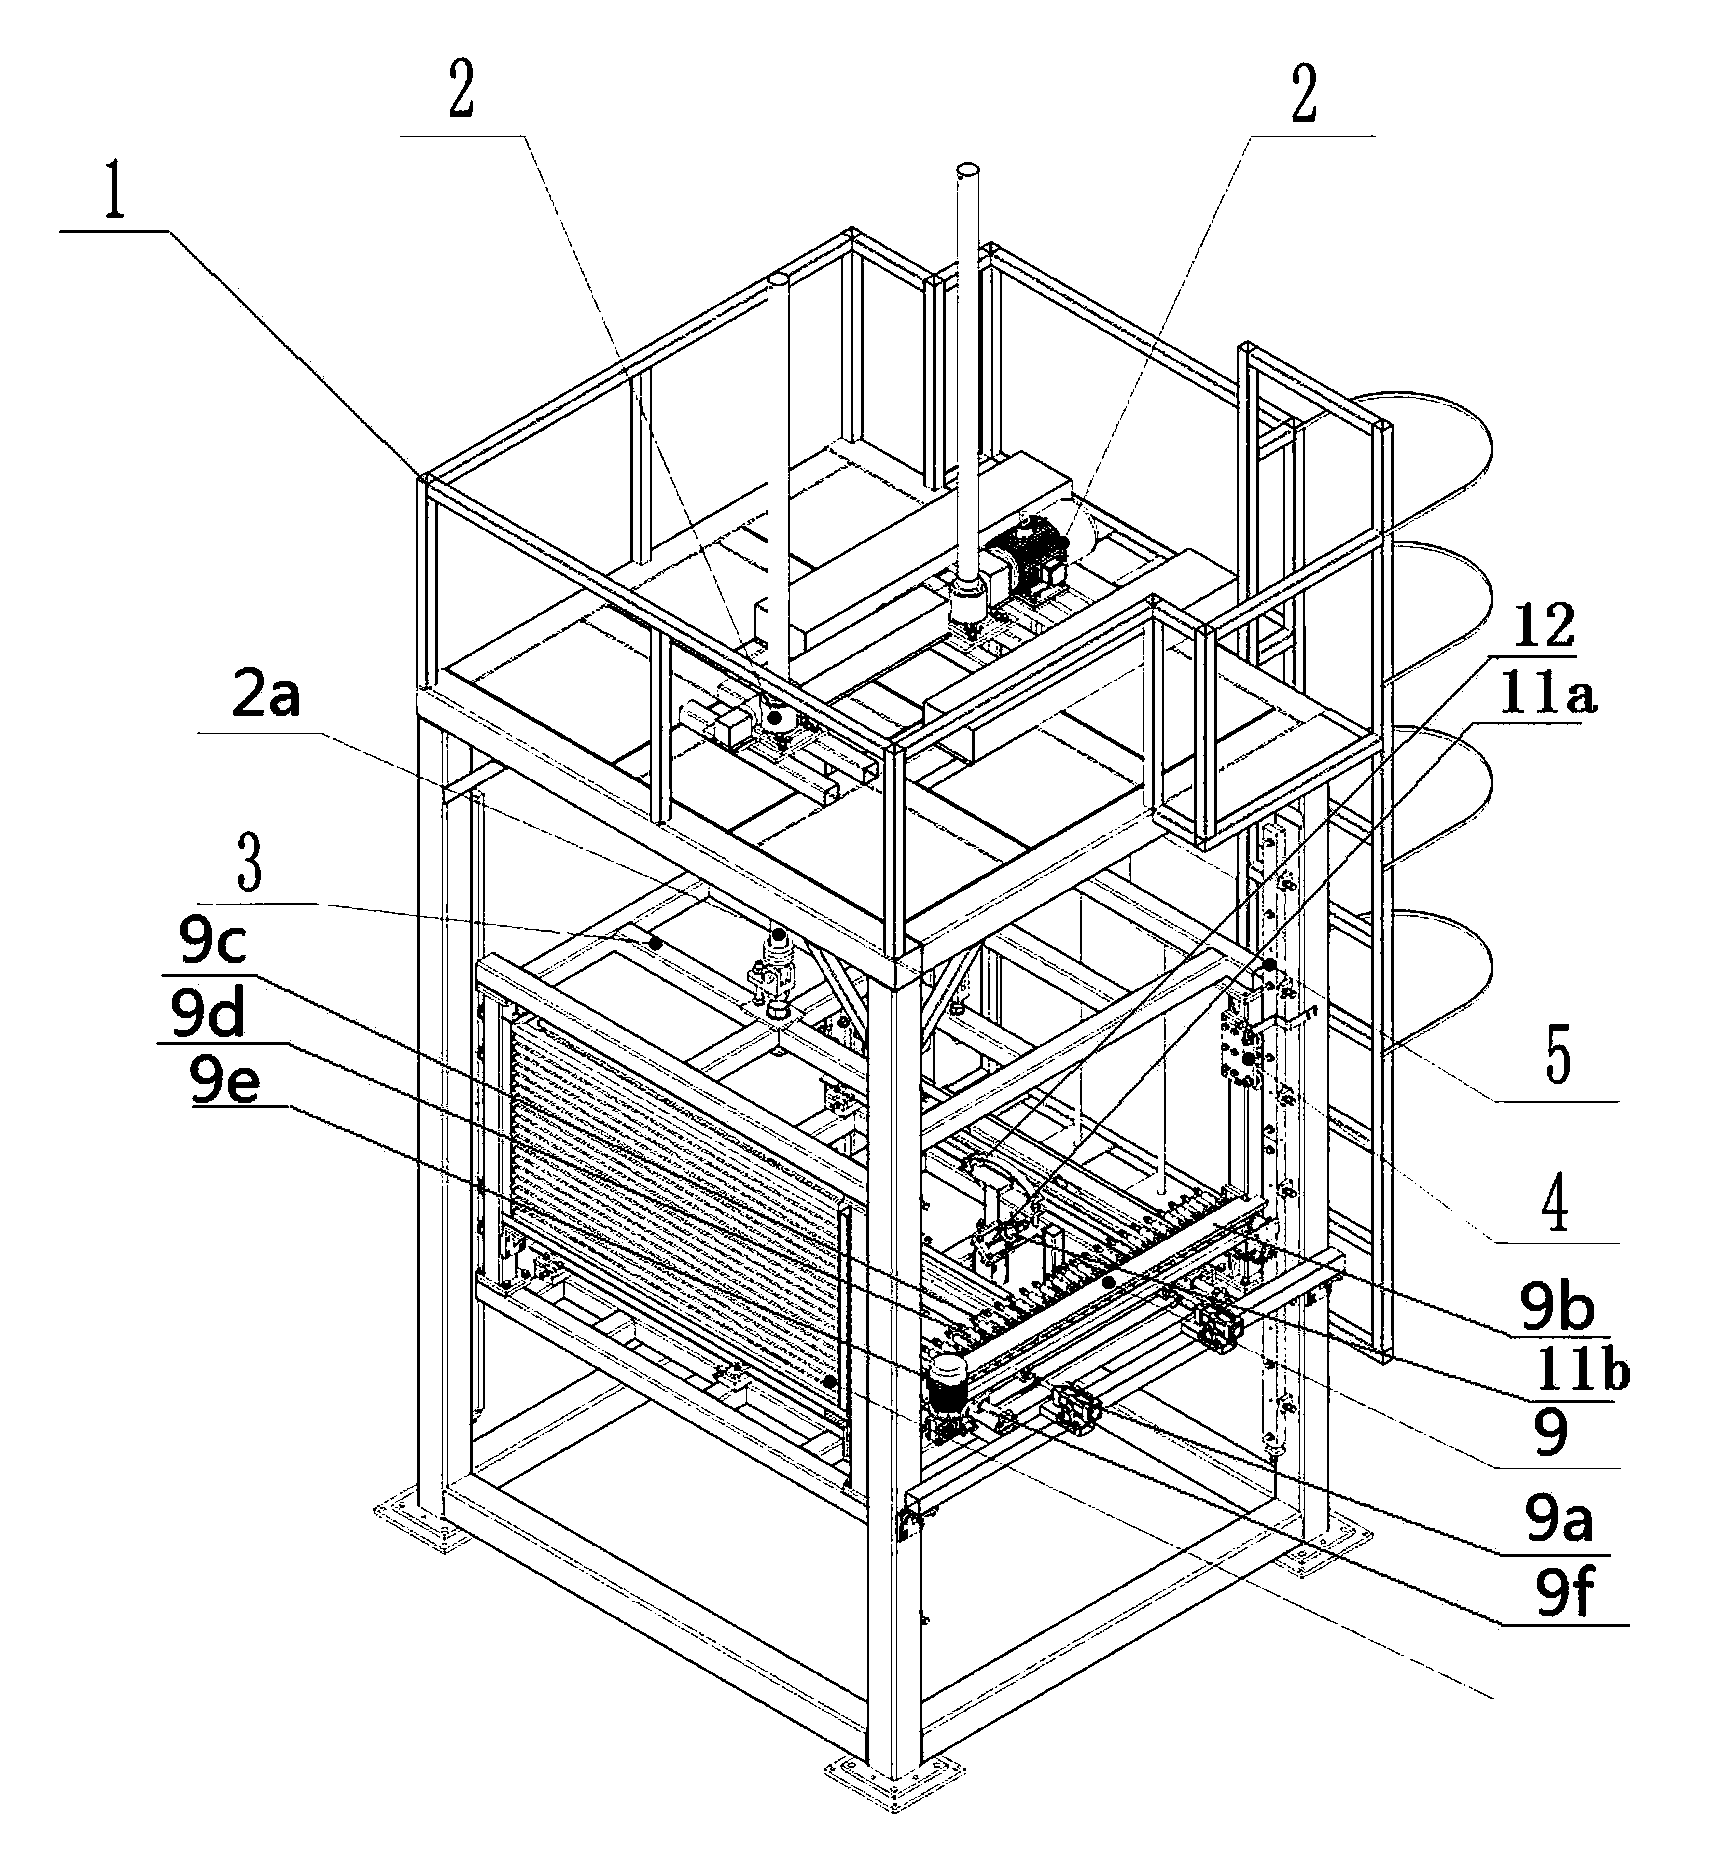 Large-sized green brick storing method and device used in front of kiln